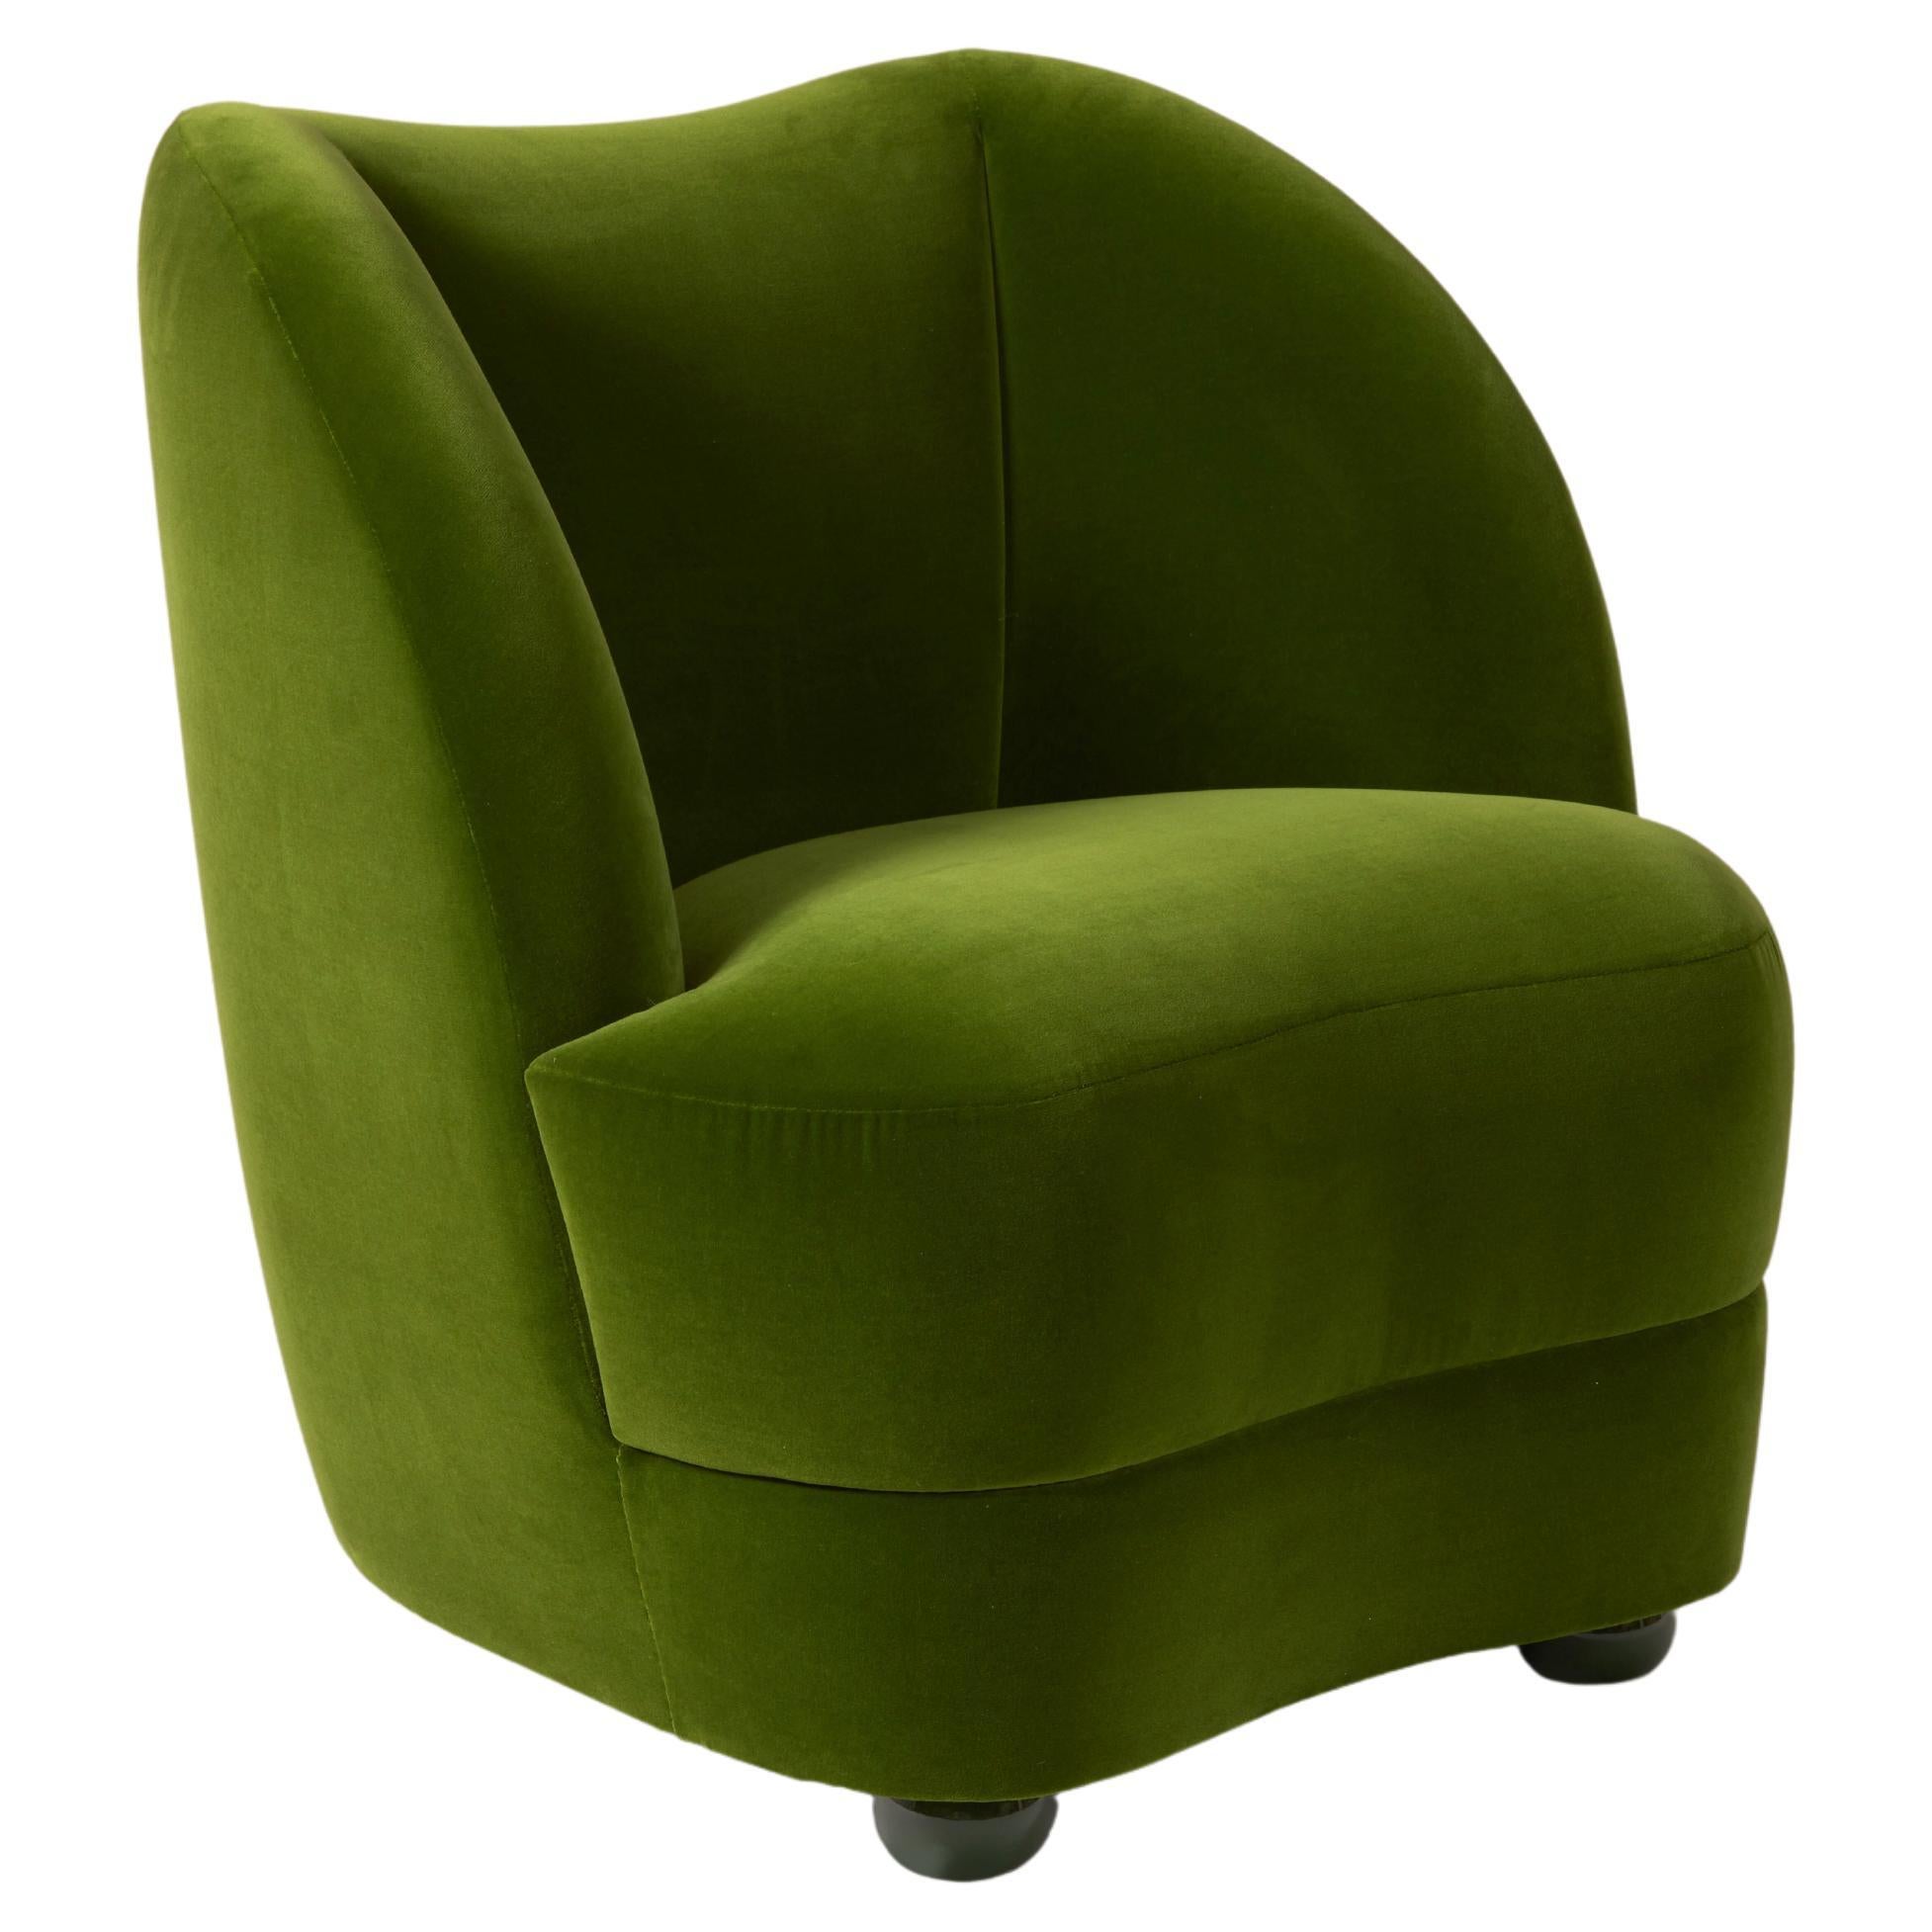 Monti Armchair Green Forest Large Model